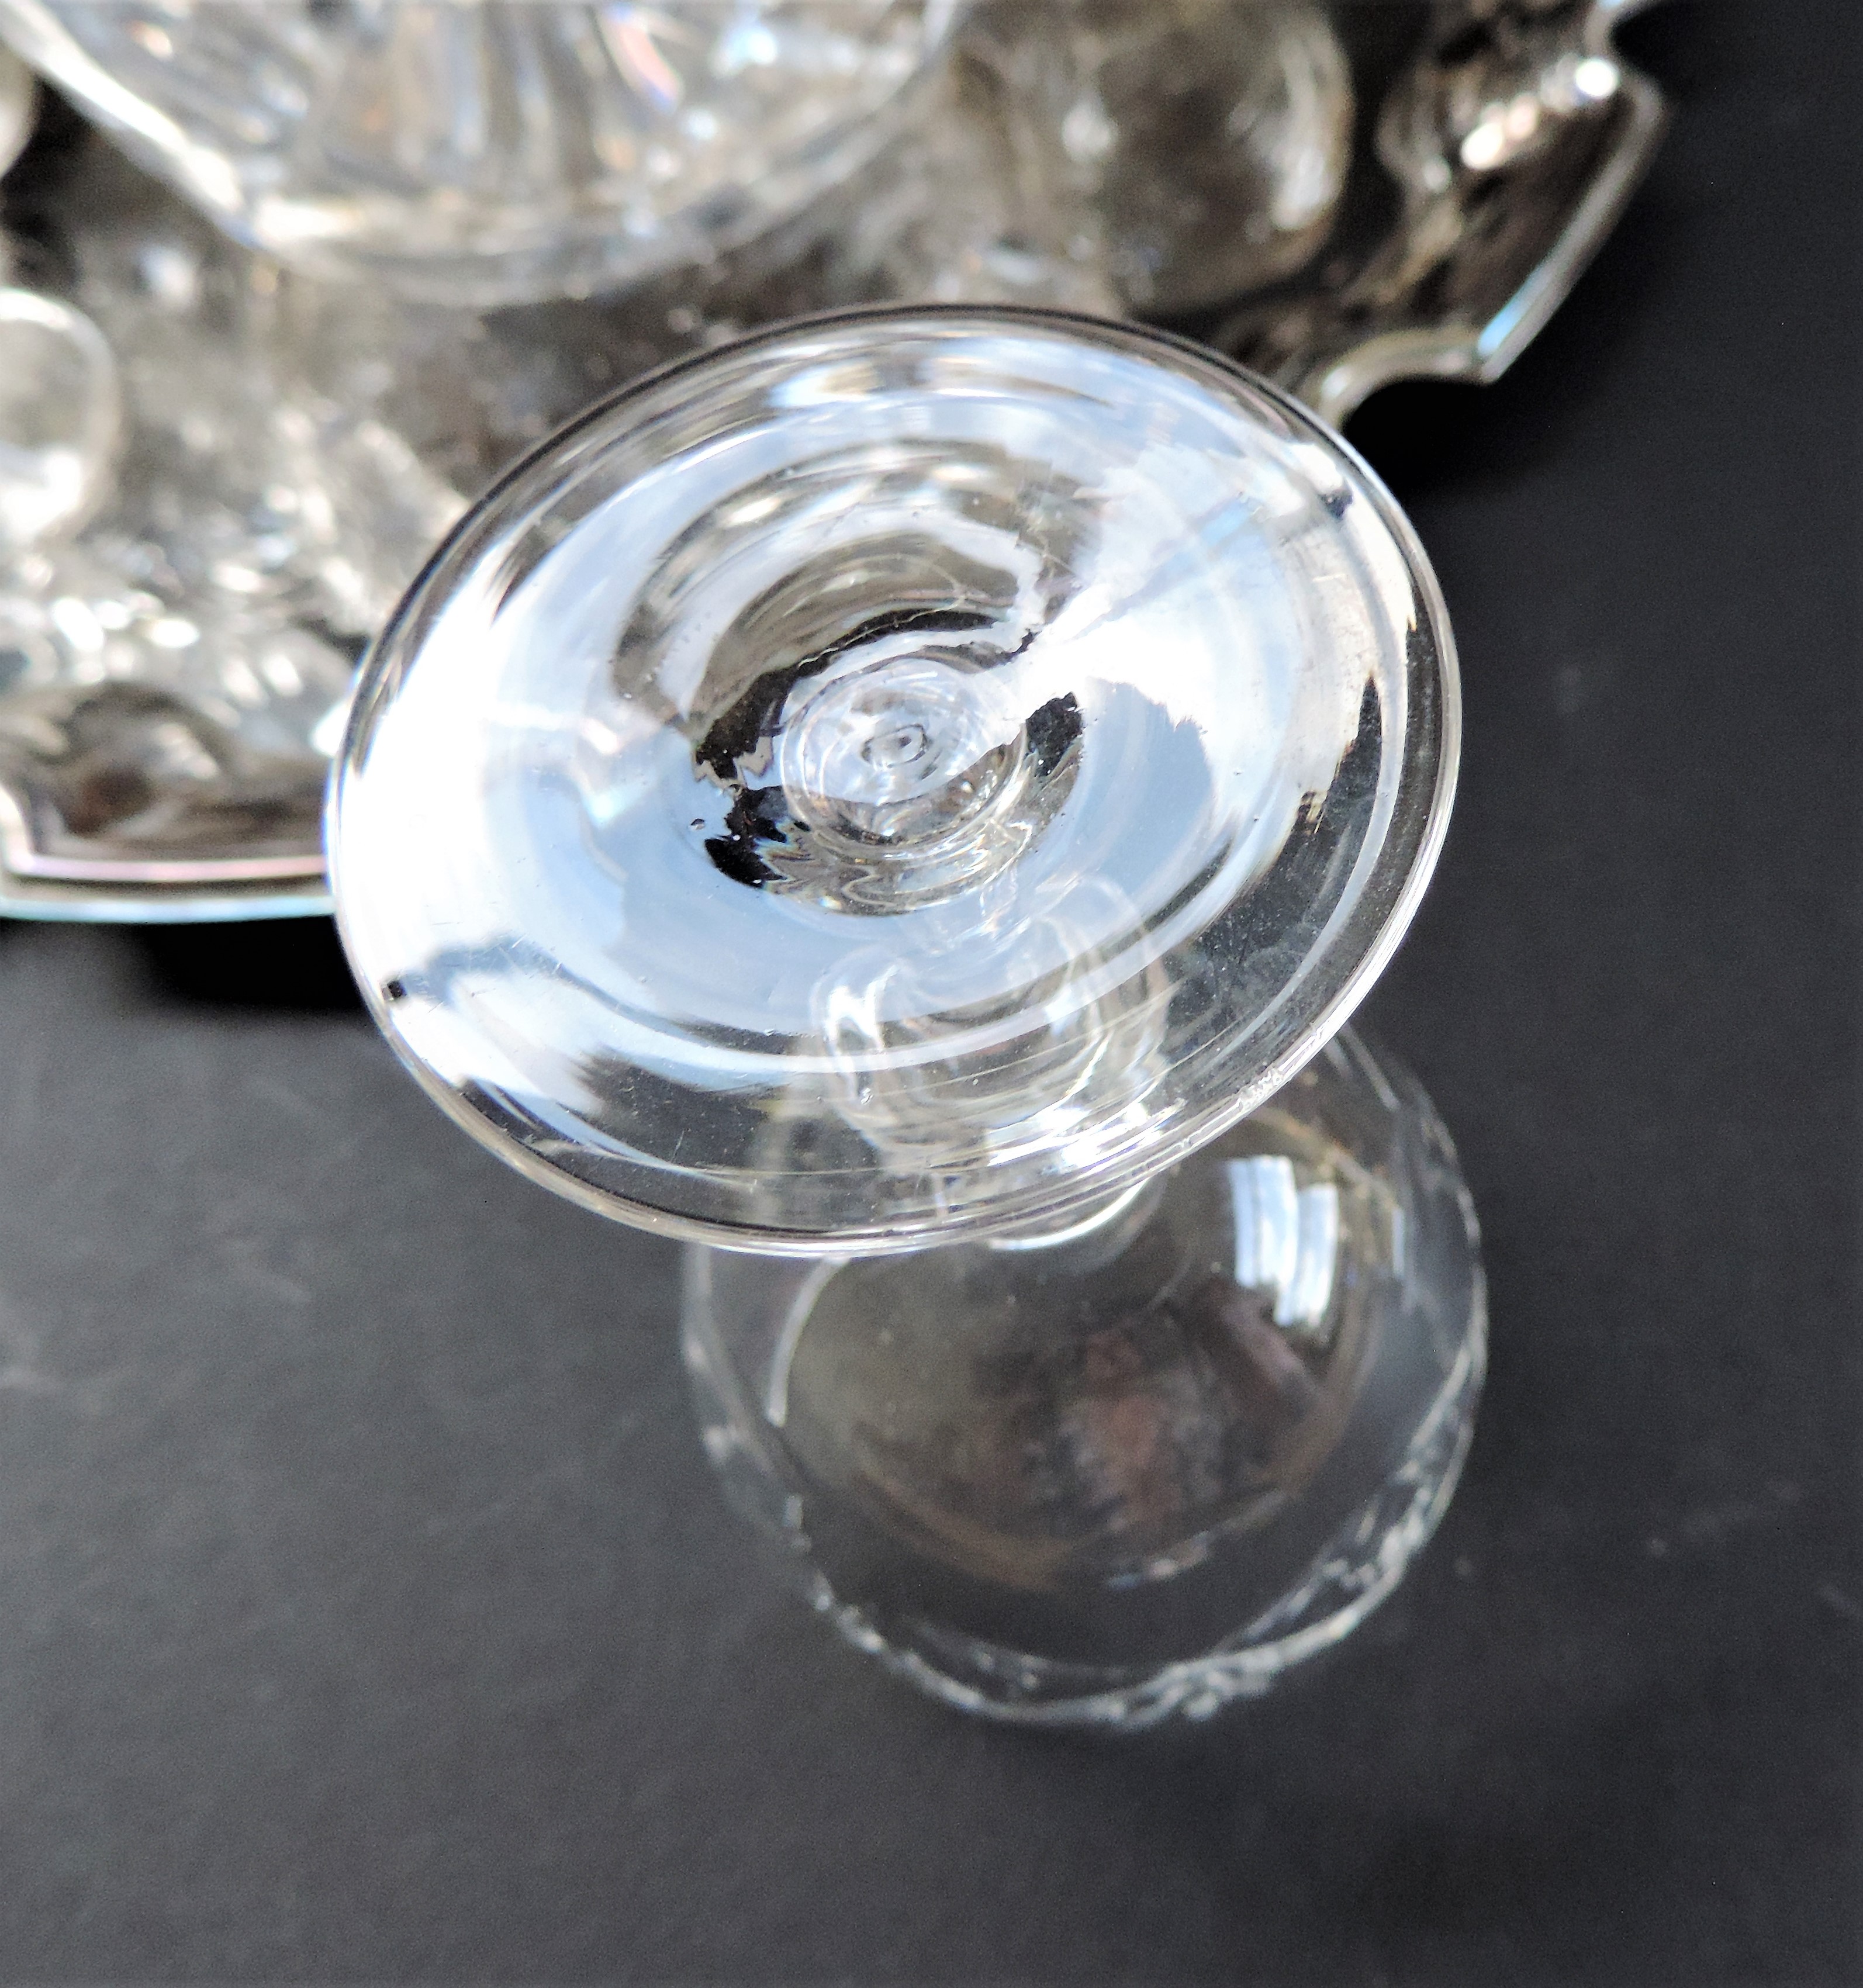 Crystal Decanter and Glasses on Silver Plate Serving Tray - Image 7 of 12